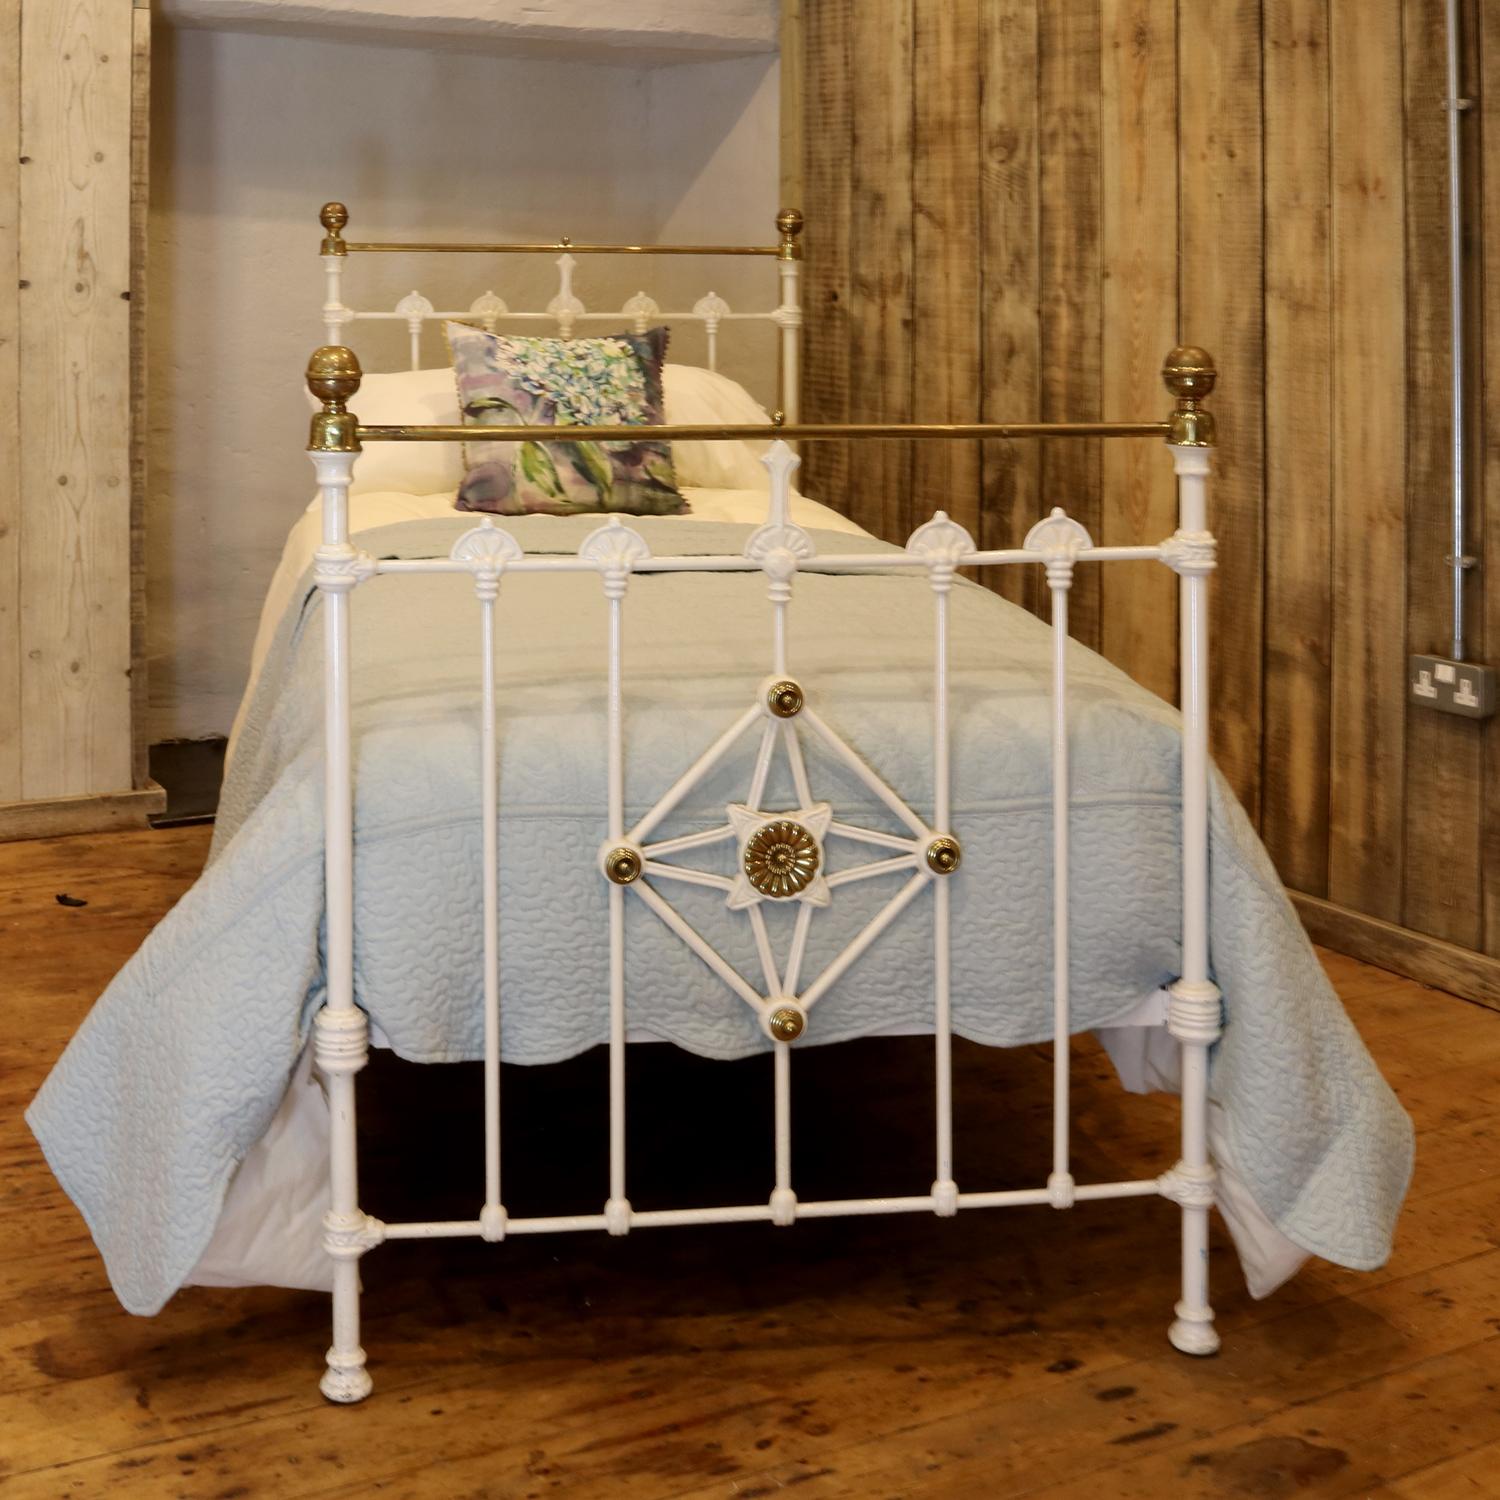 A traditional style Victorian antique bed painted in antique white. This bed is highly decorative, with stunning features, including fantail mouldings and a diamond central feature with brass plaques on the footboard. 

This bed accepts a standard